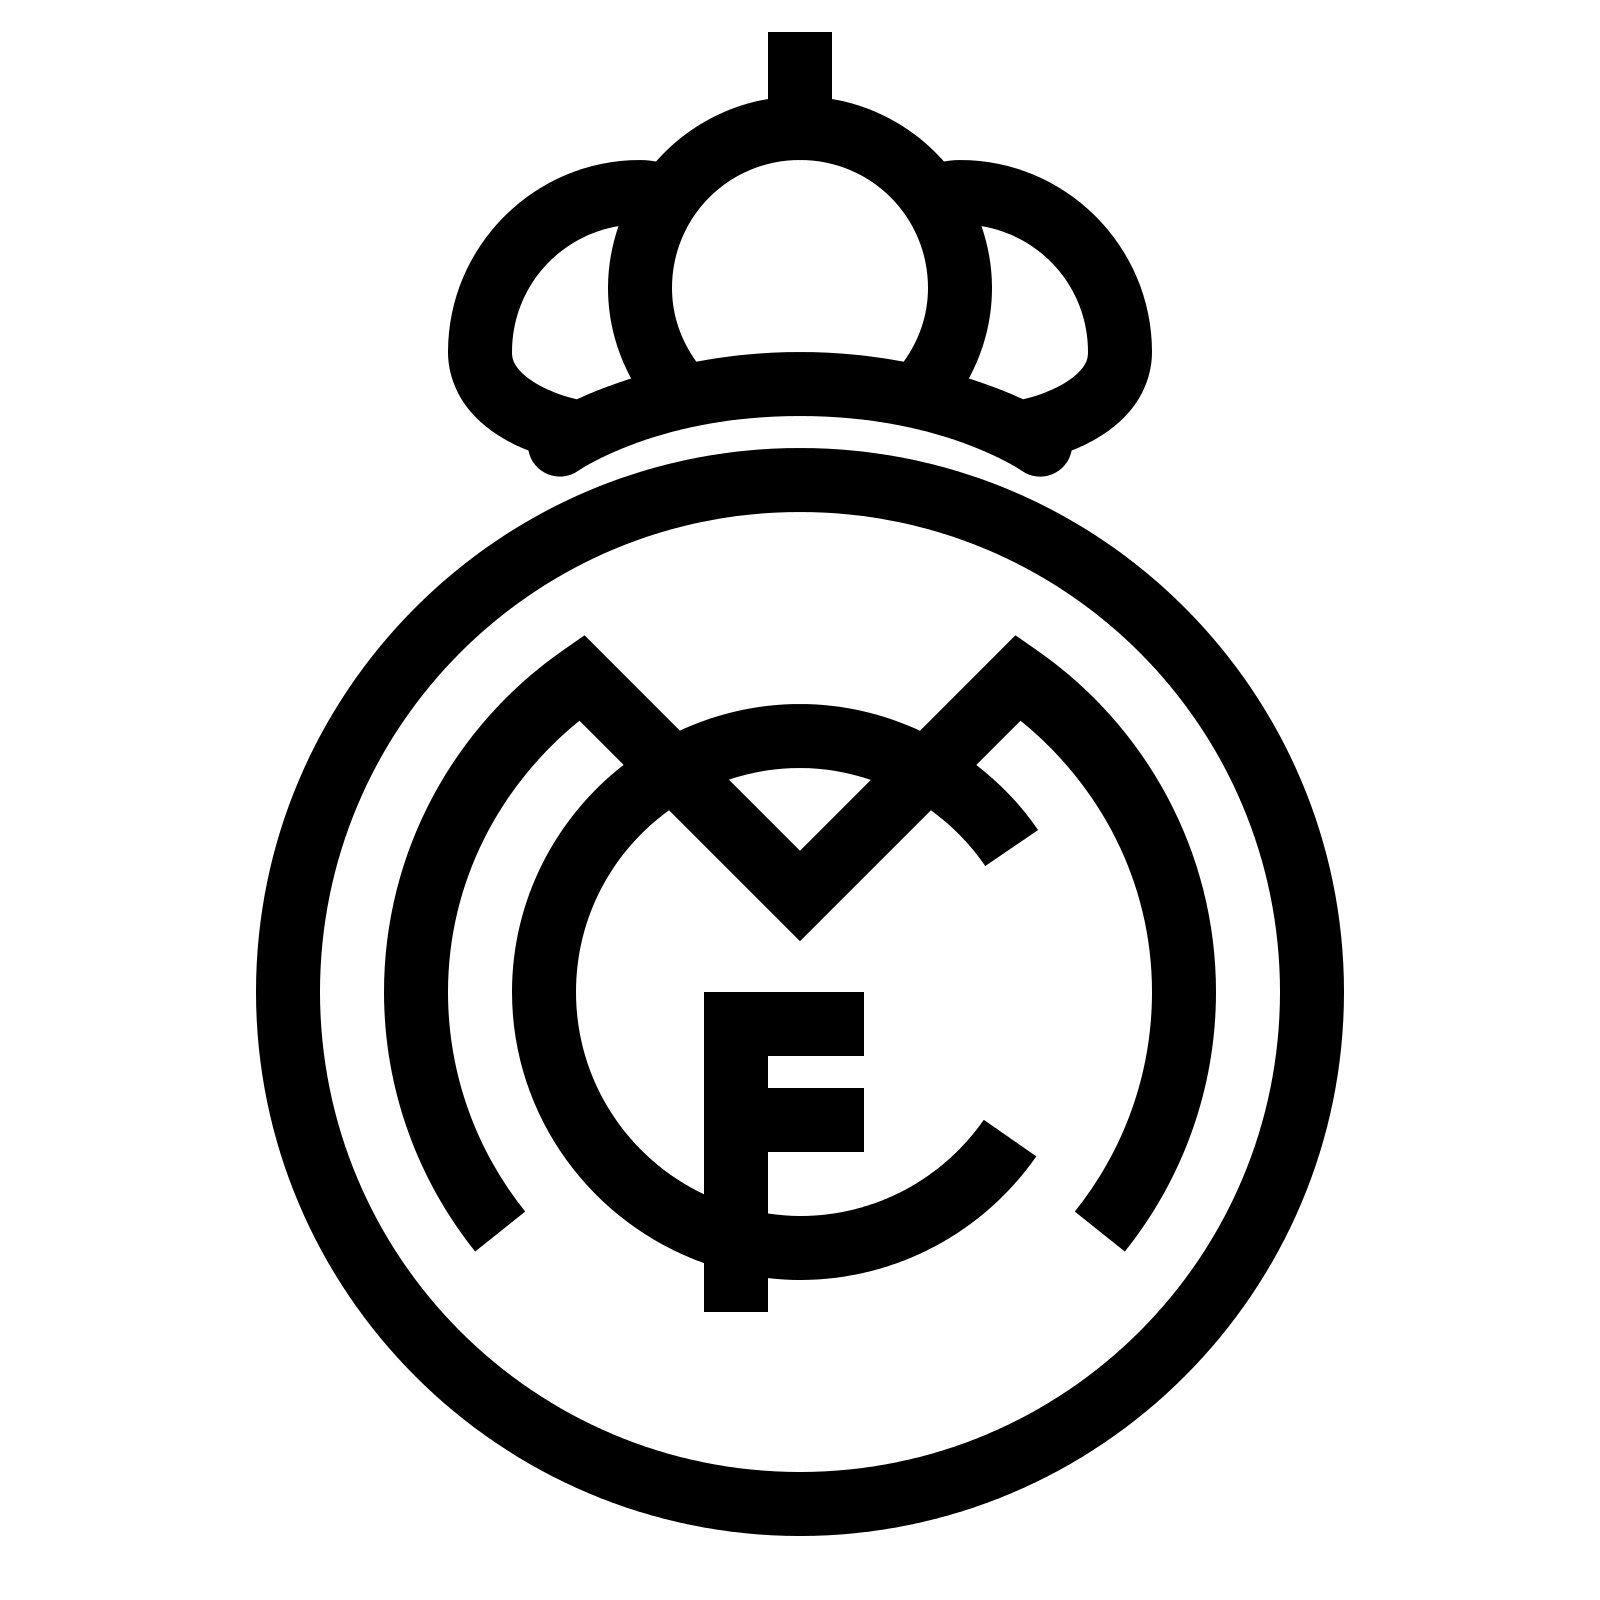 Madrid Logo - Meaning Real Madrid logo and symbol | history and evolution